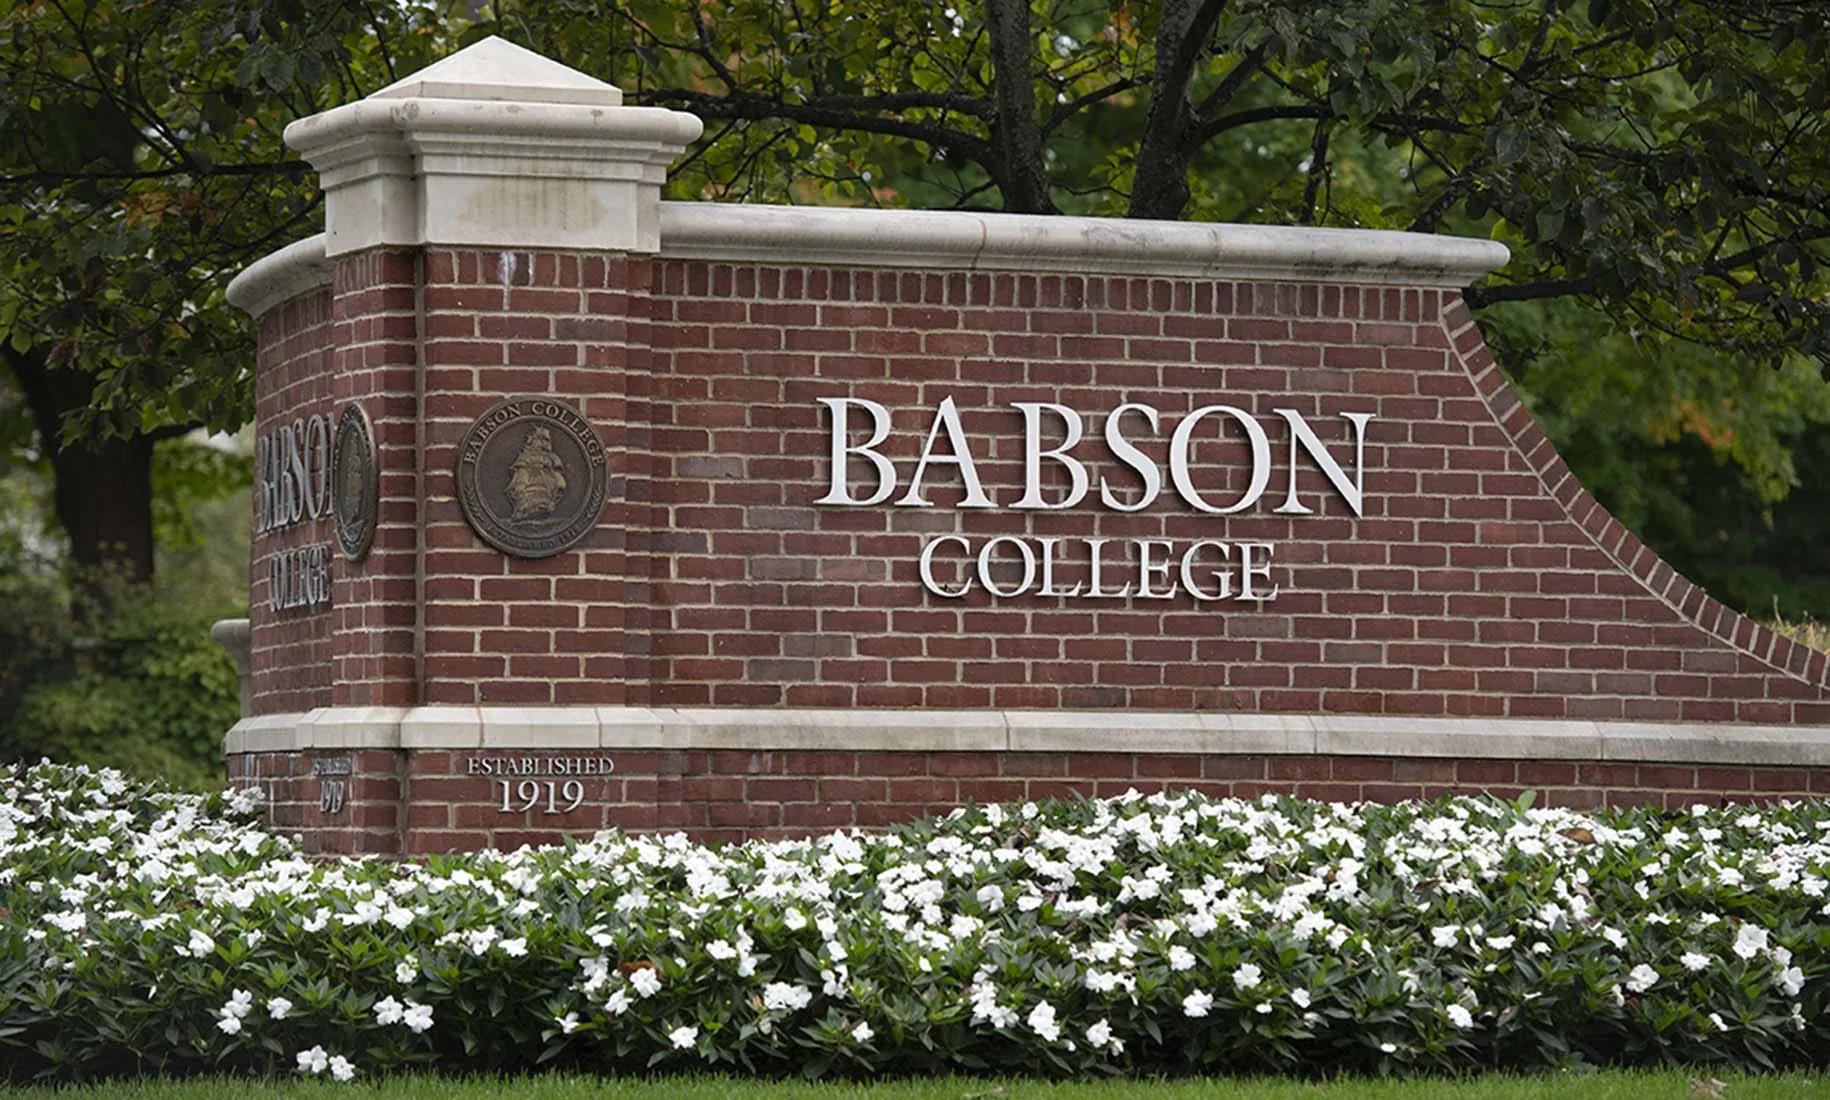 Arriba 95+ imagen babson admissions office - Abzlocal.mx